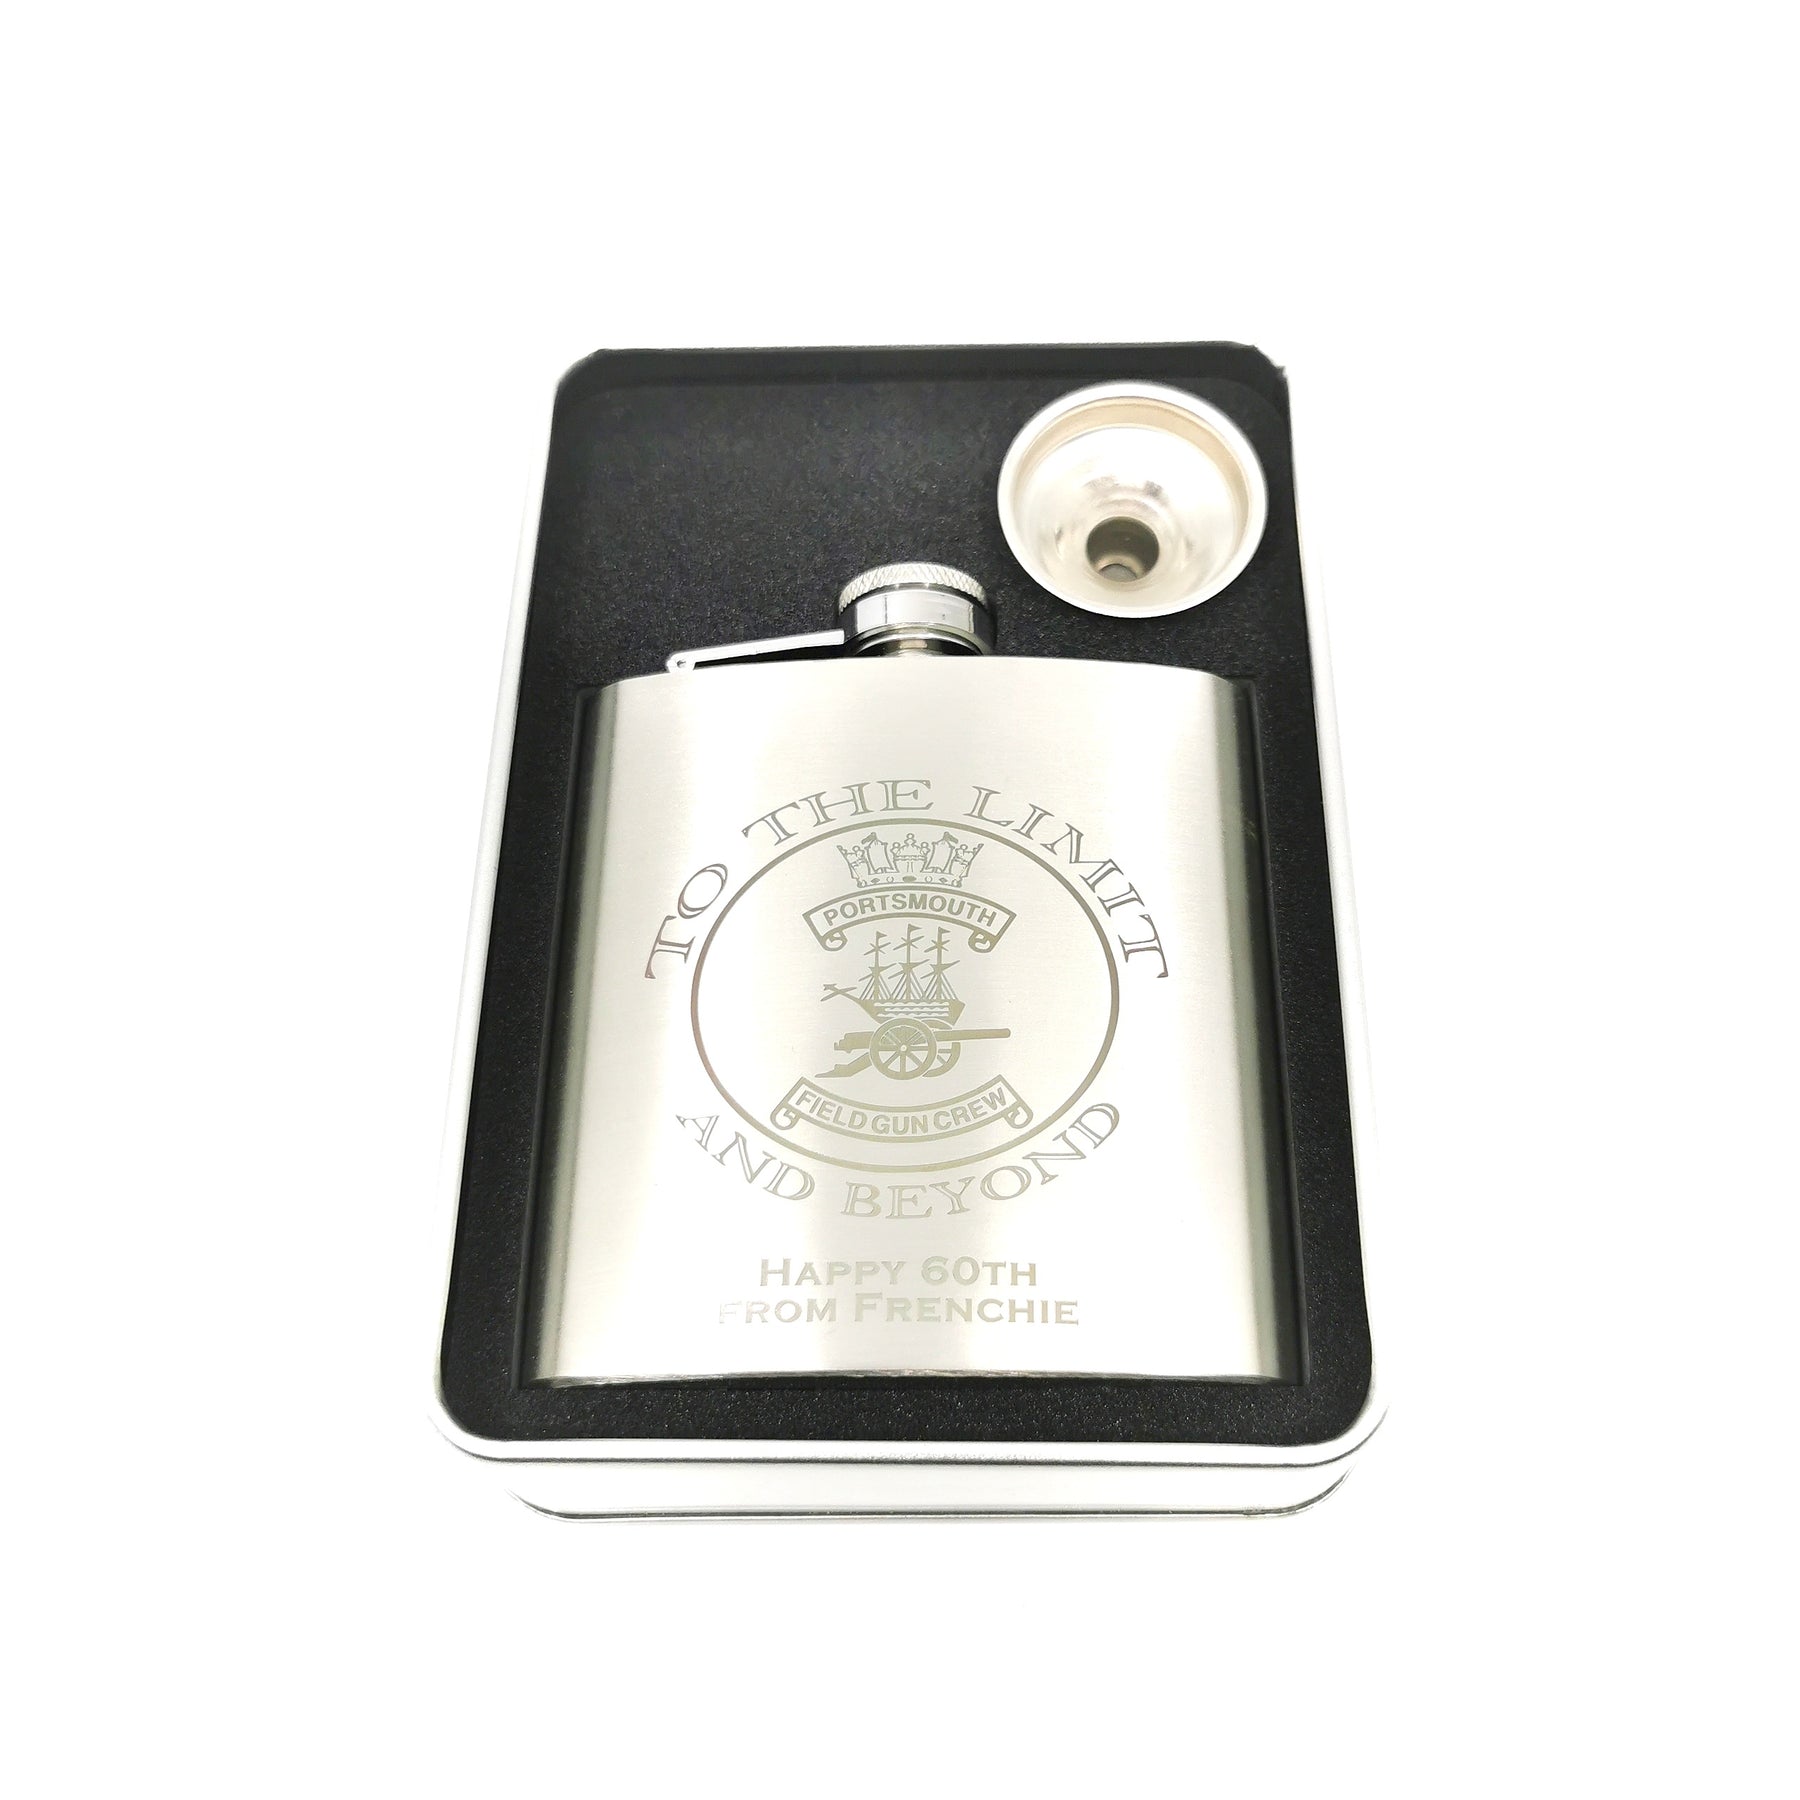 Brushed Steel Hip flask with tin gift box set